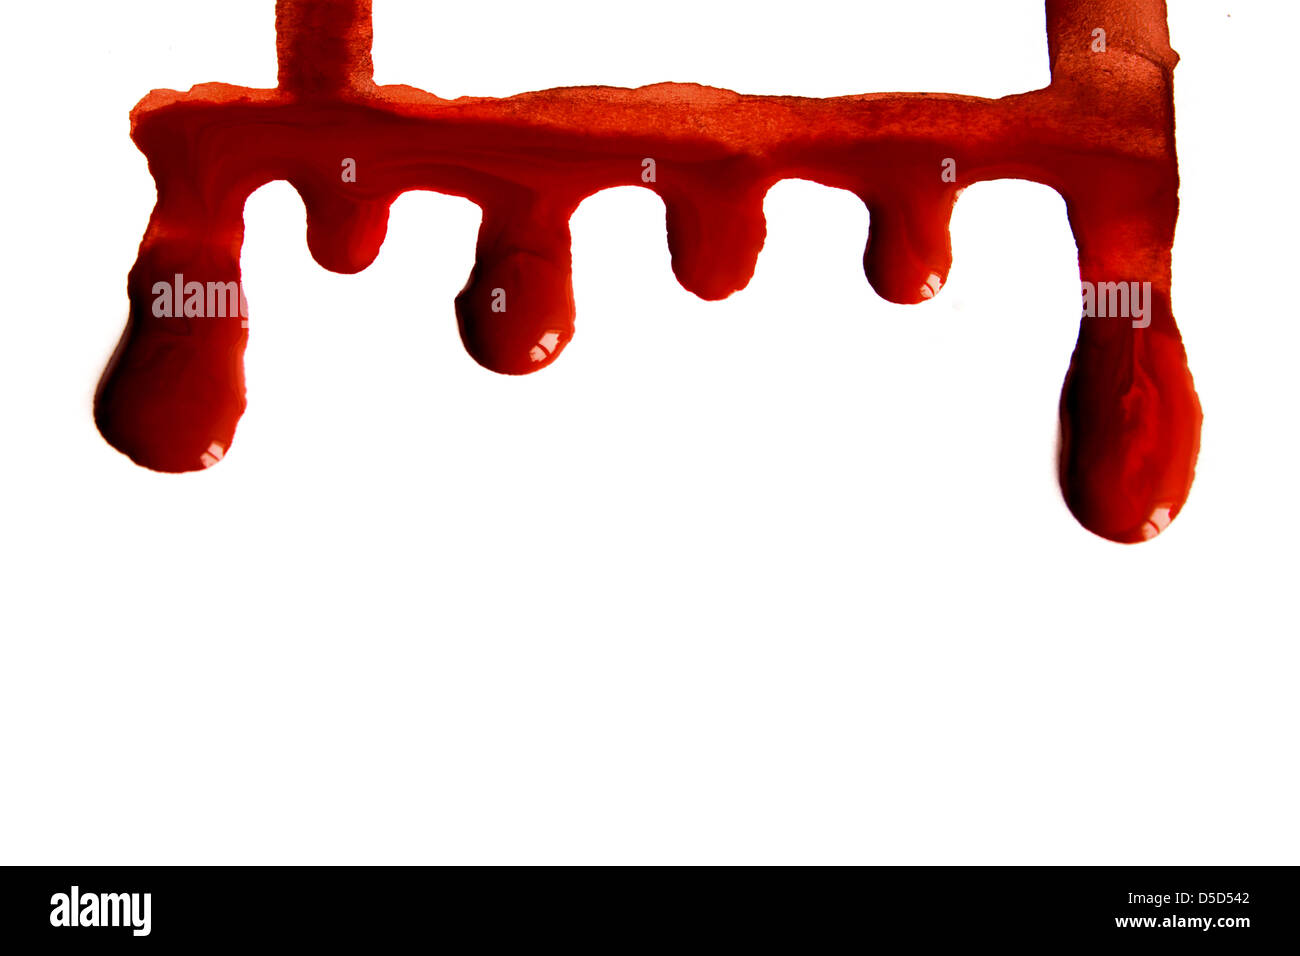 Blood stains isolated on white background Stock Photo